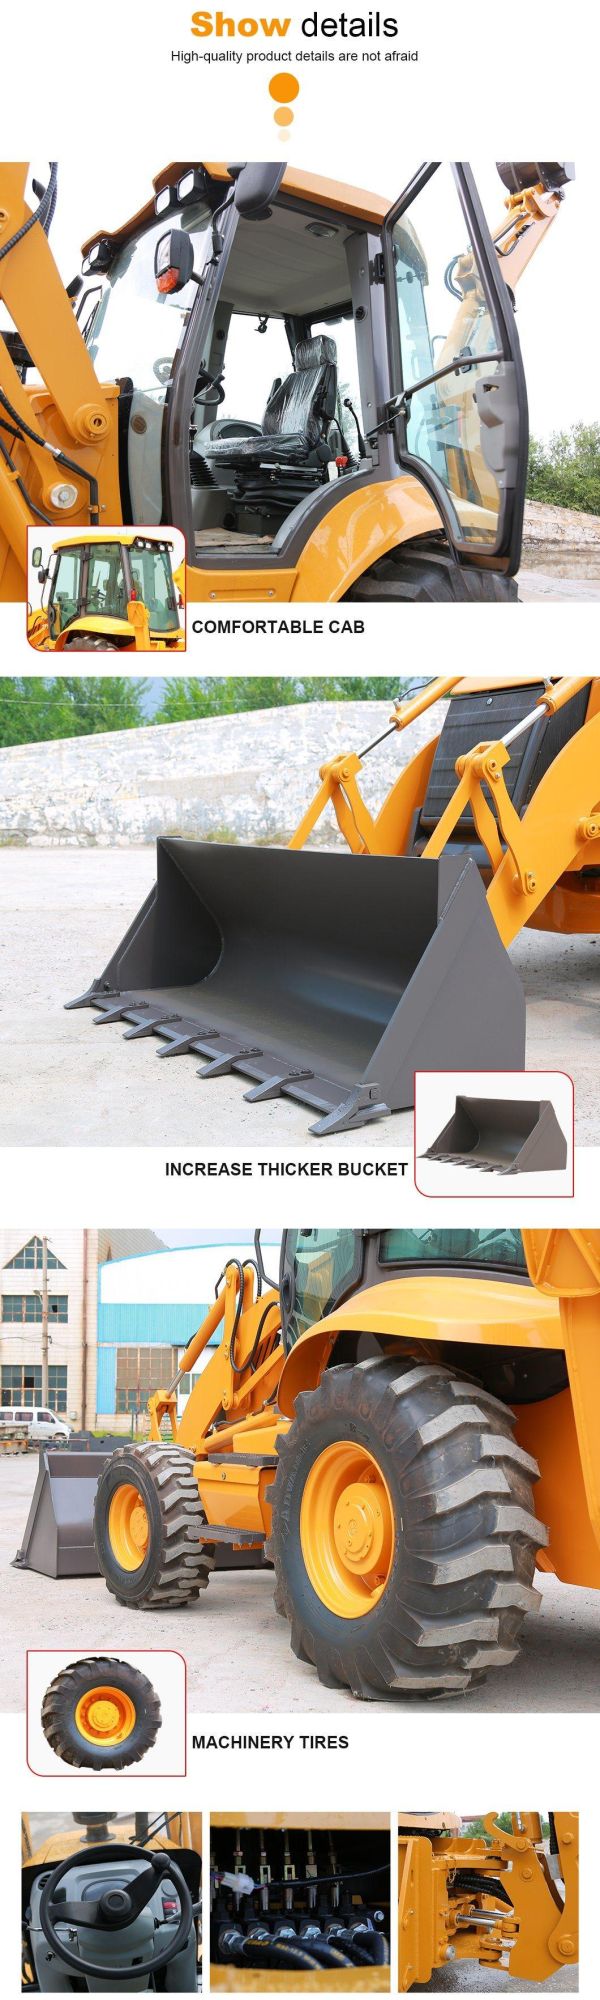 Hot Product Mini Tractor Backhoe Loader The Cheapest Mini Small Backhoe Loader 4X4 Backhoe for Sale with Price